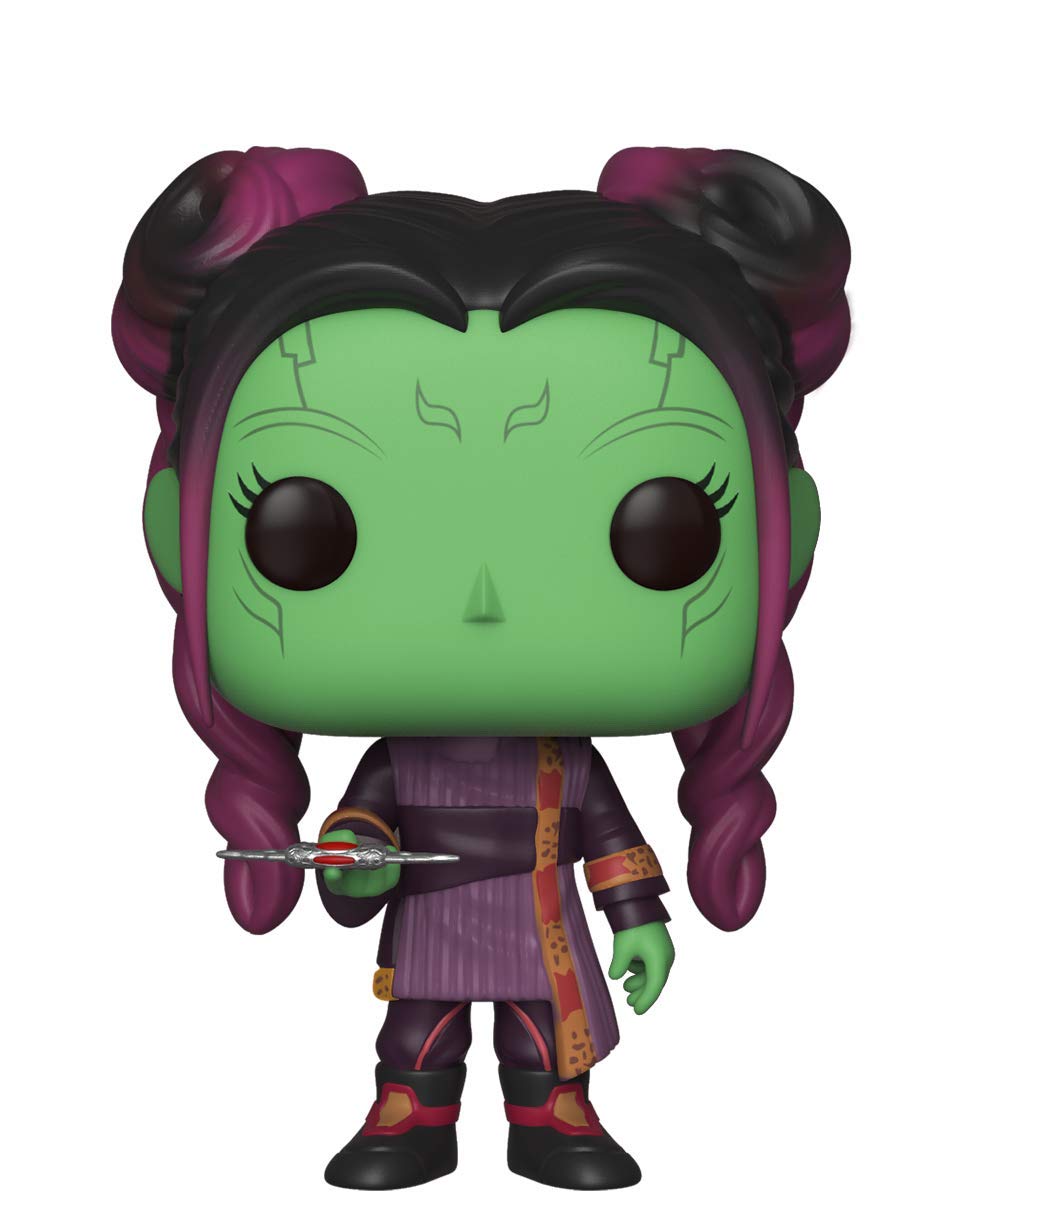 Funko Pop! Marvel: Avengers Infinity War - Young Gamora with Dagger, Standard Toy, Multicolor